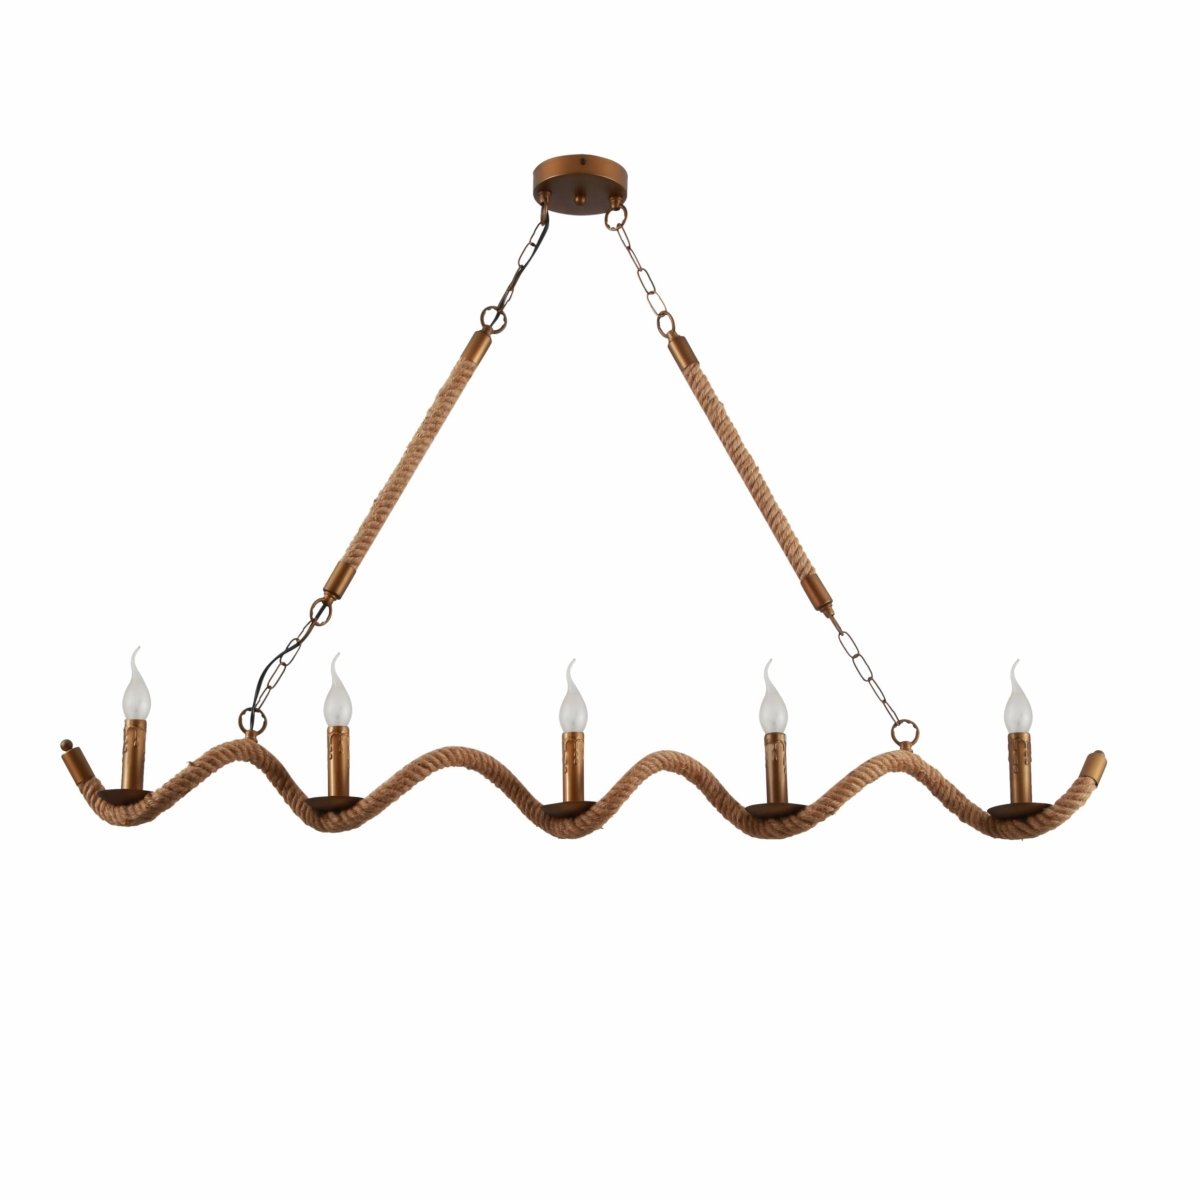 Main image of Hemp Rope Spiral Island Chandelier with 5xE14 Fitting | TEKLED 158-17592